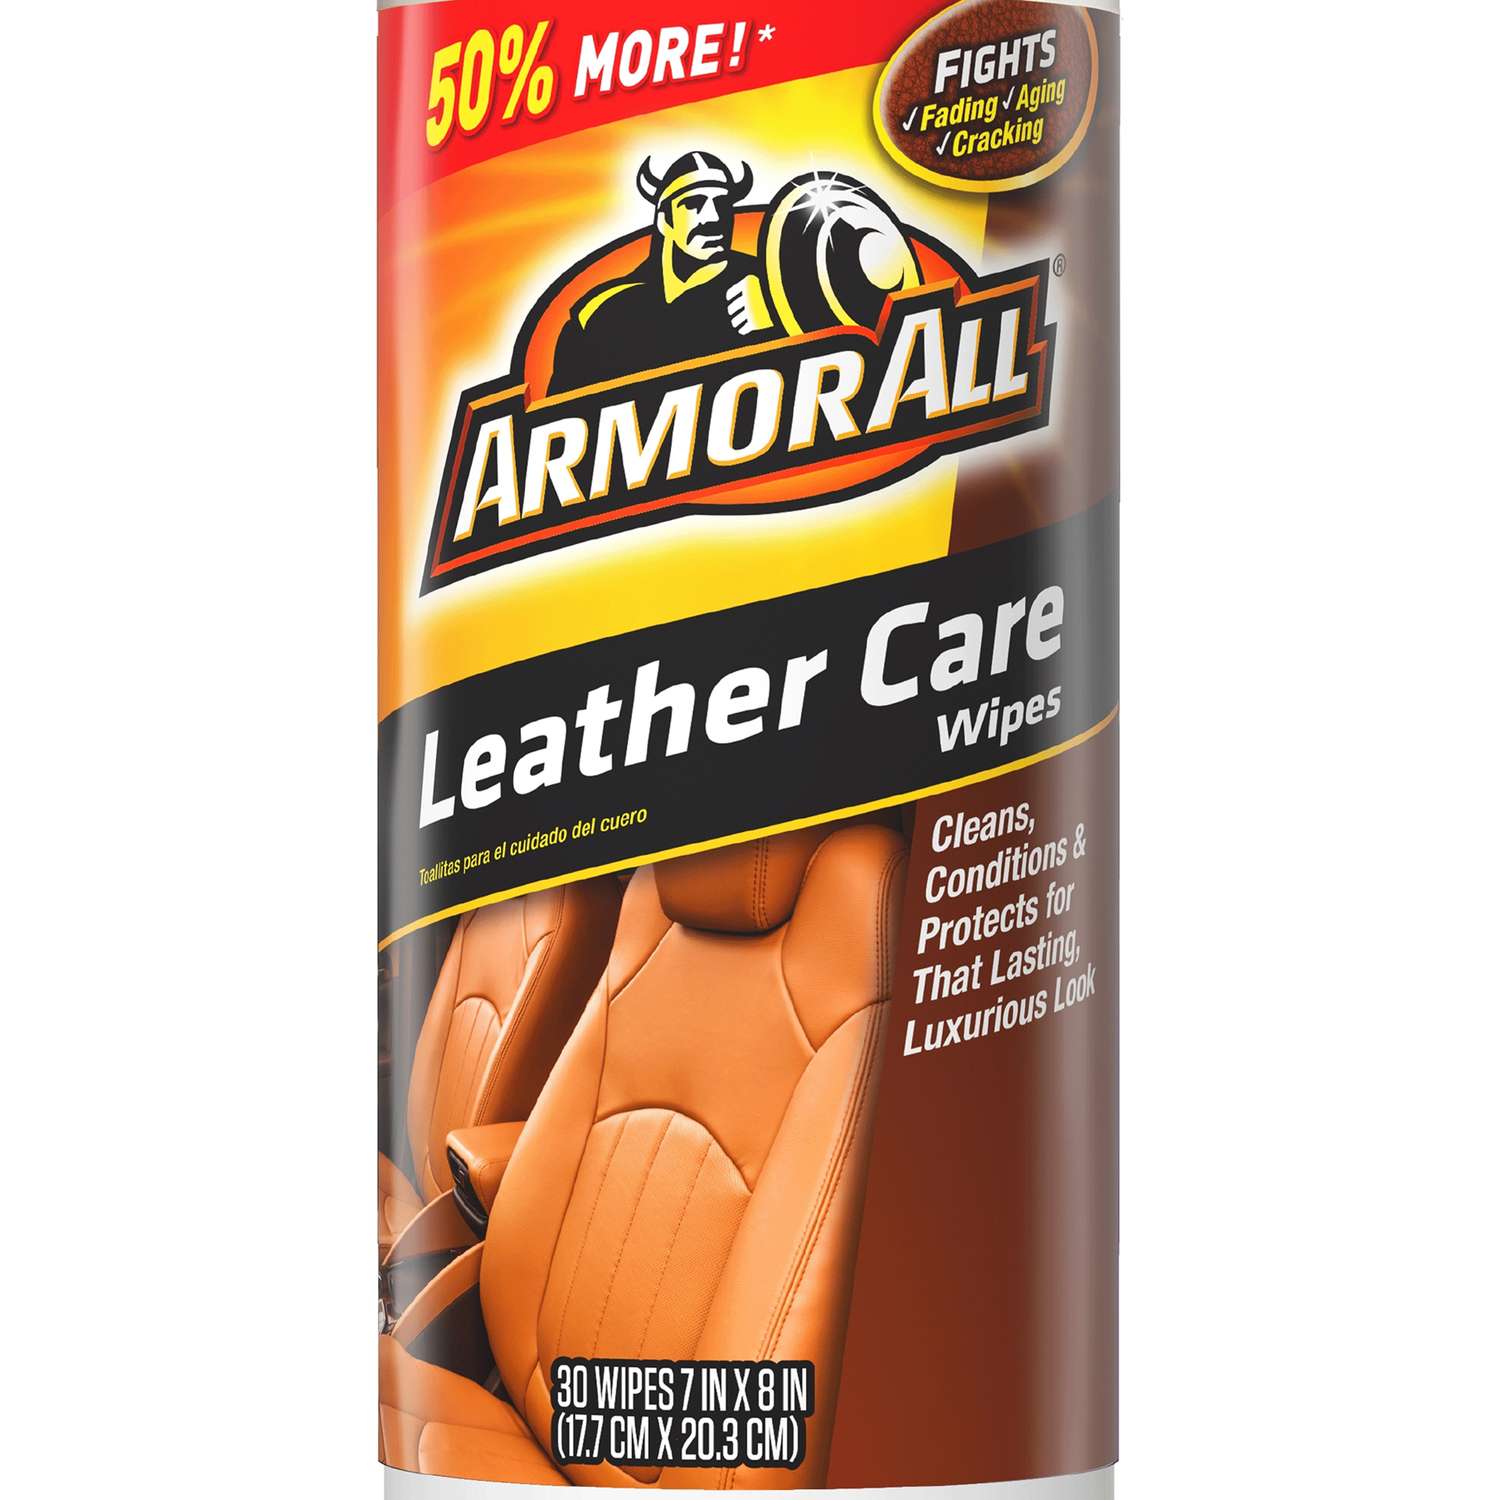 Armor All Leather Care Wipes (30-Count), White